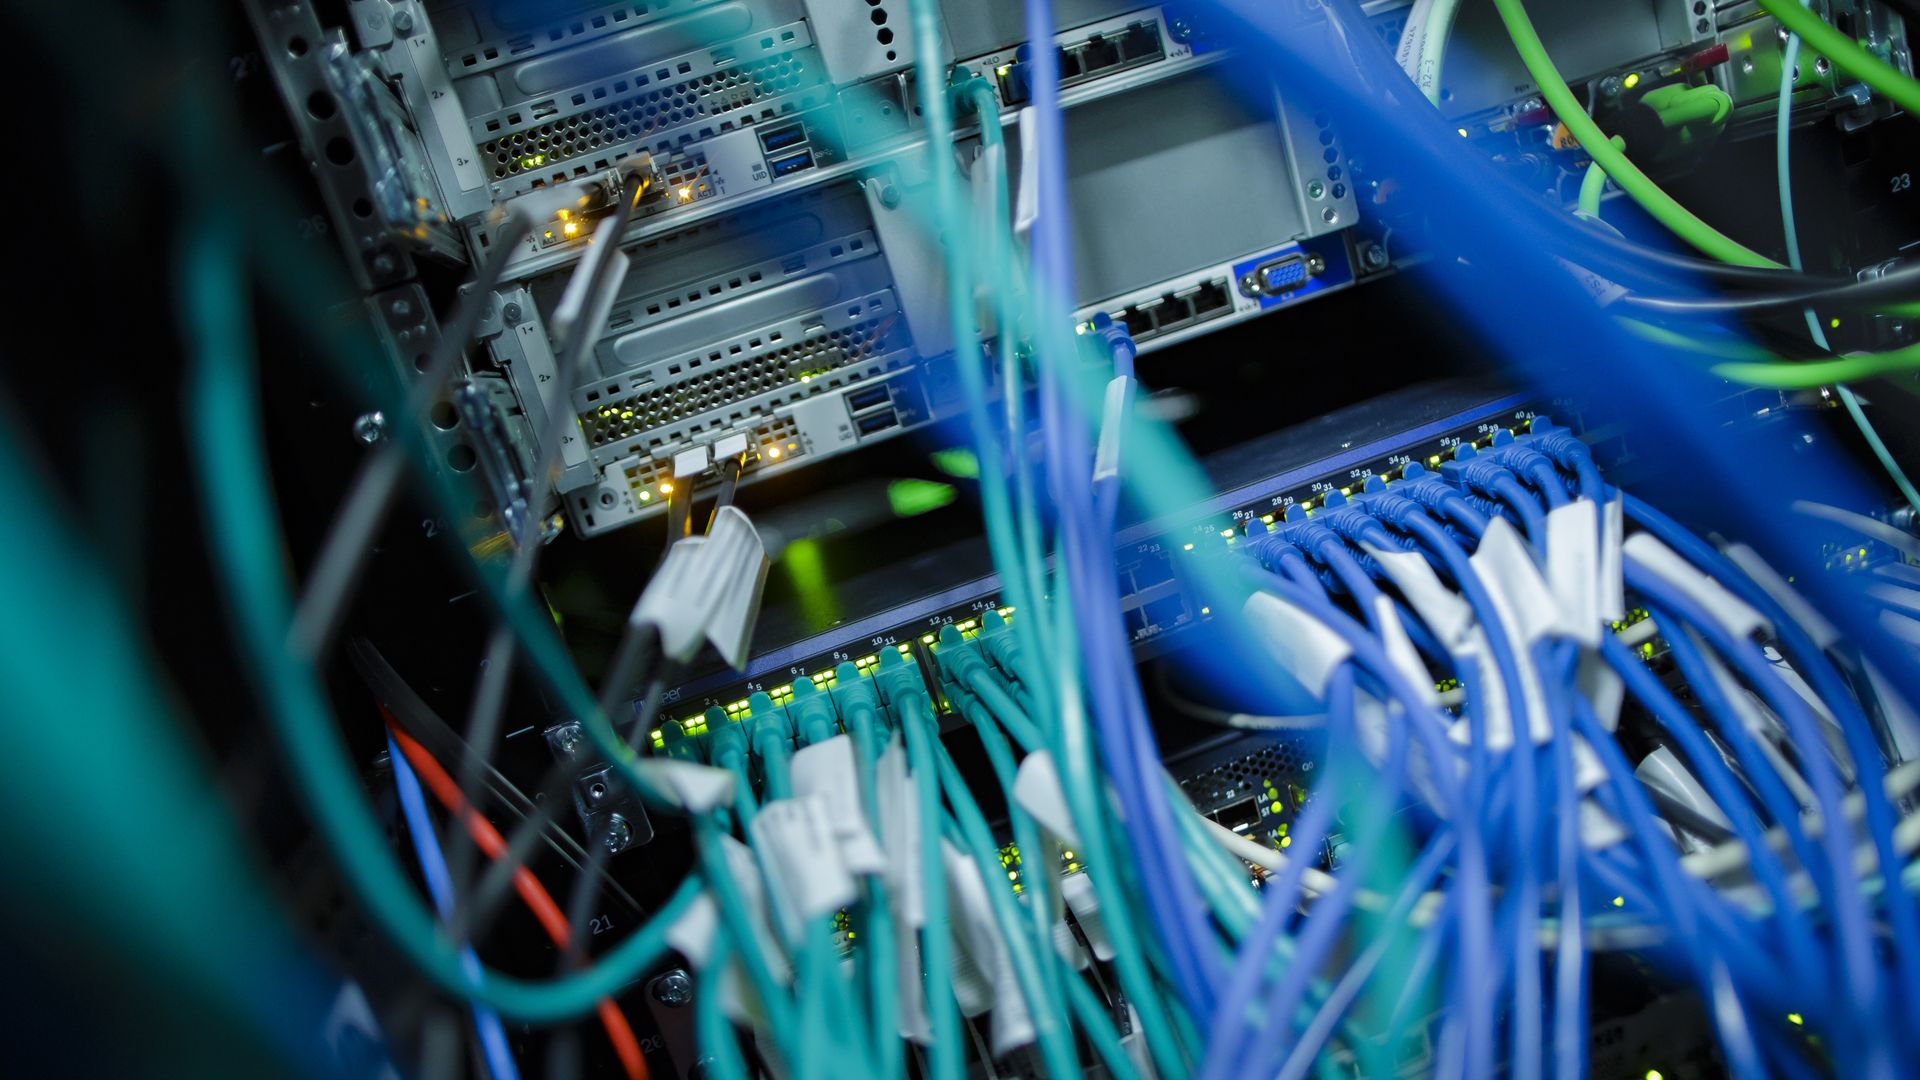 Close-up photo of cables and LED lights in a computer server